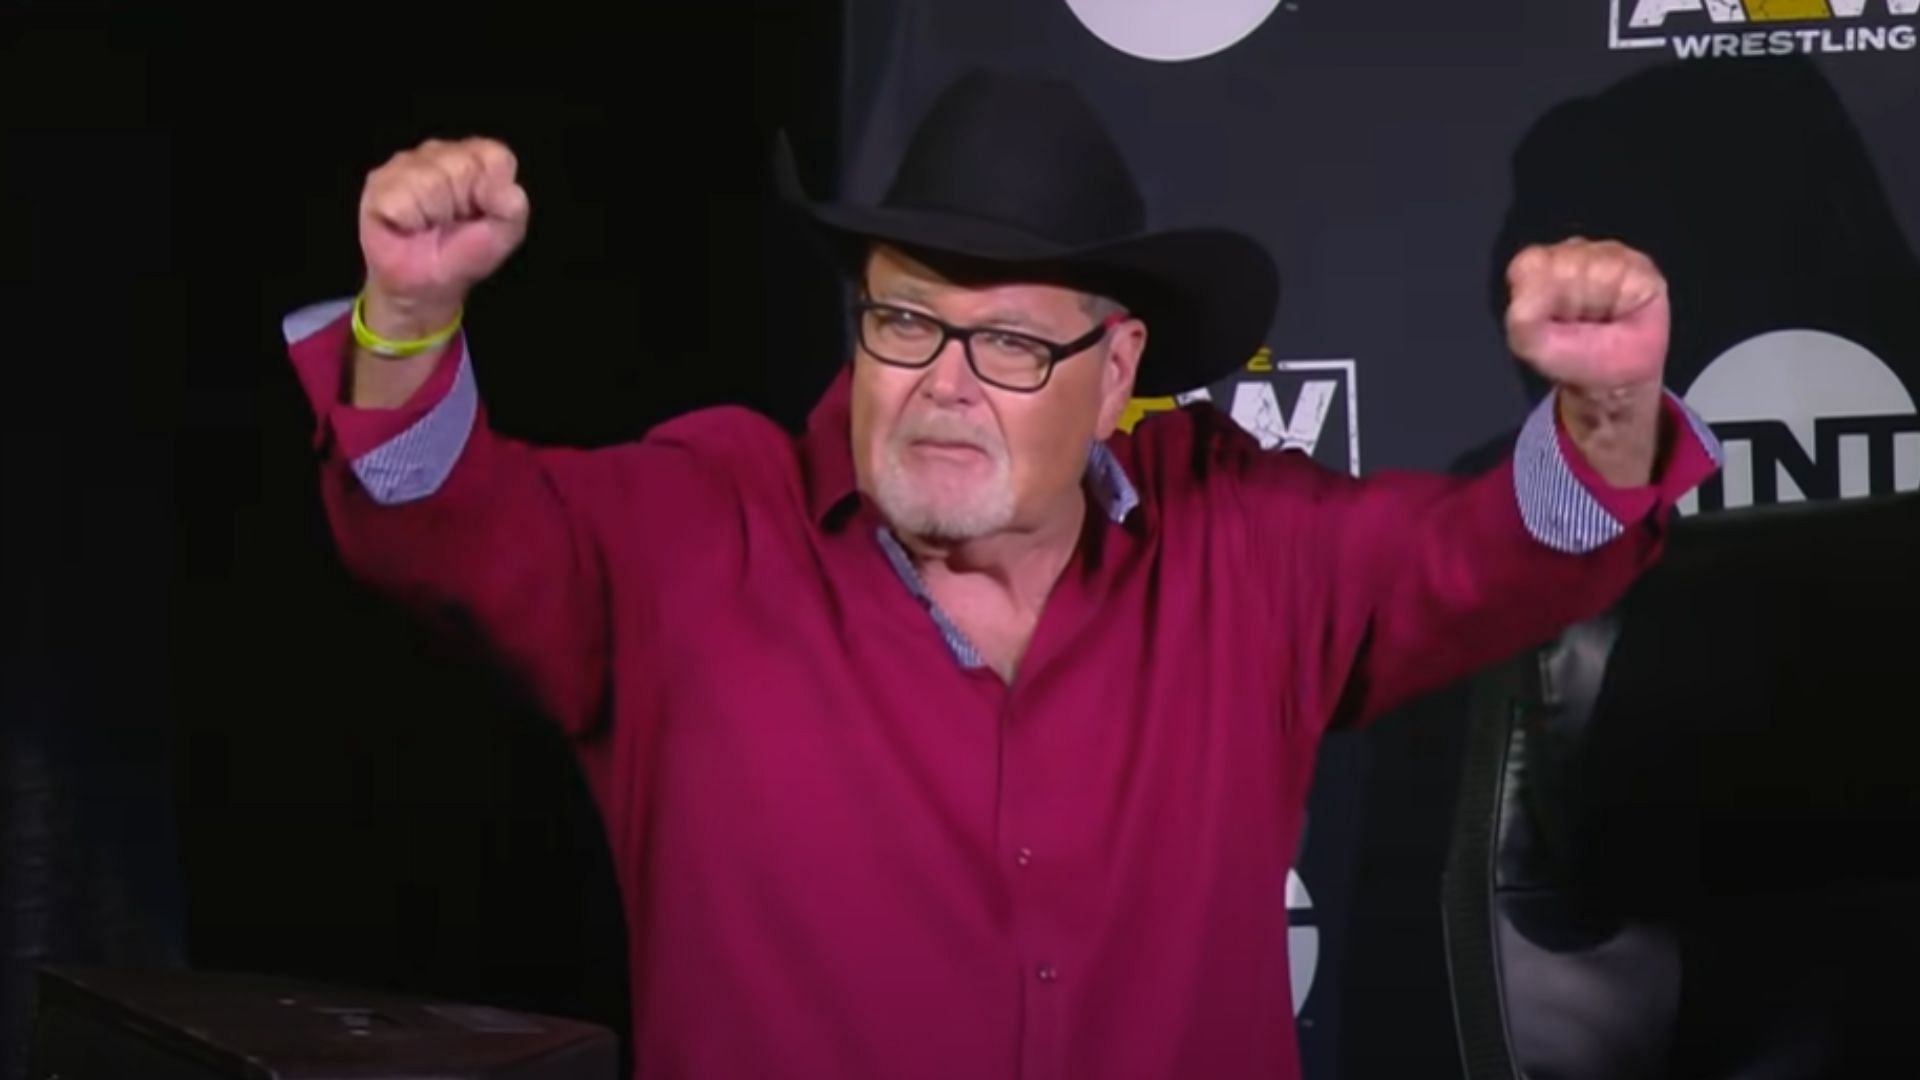 Jim Ross signed with AEW in 2019 [Image Credits: AEW